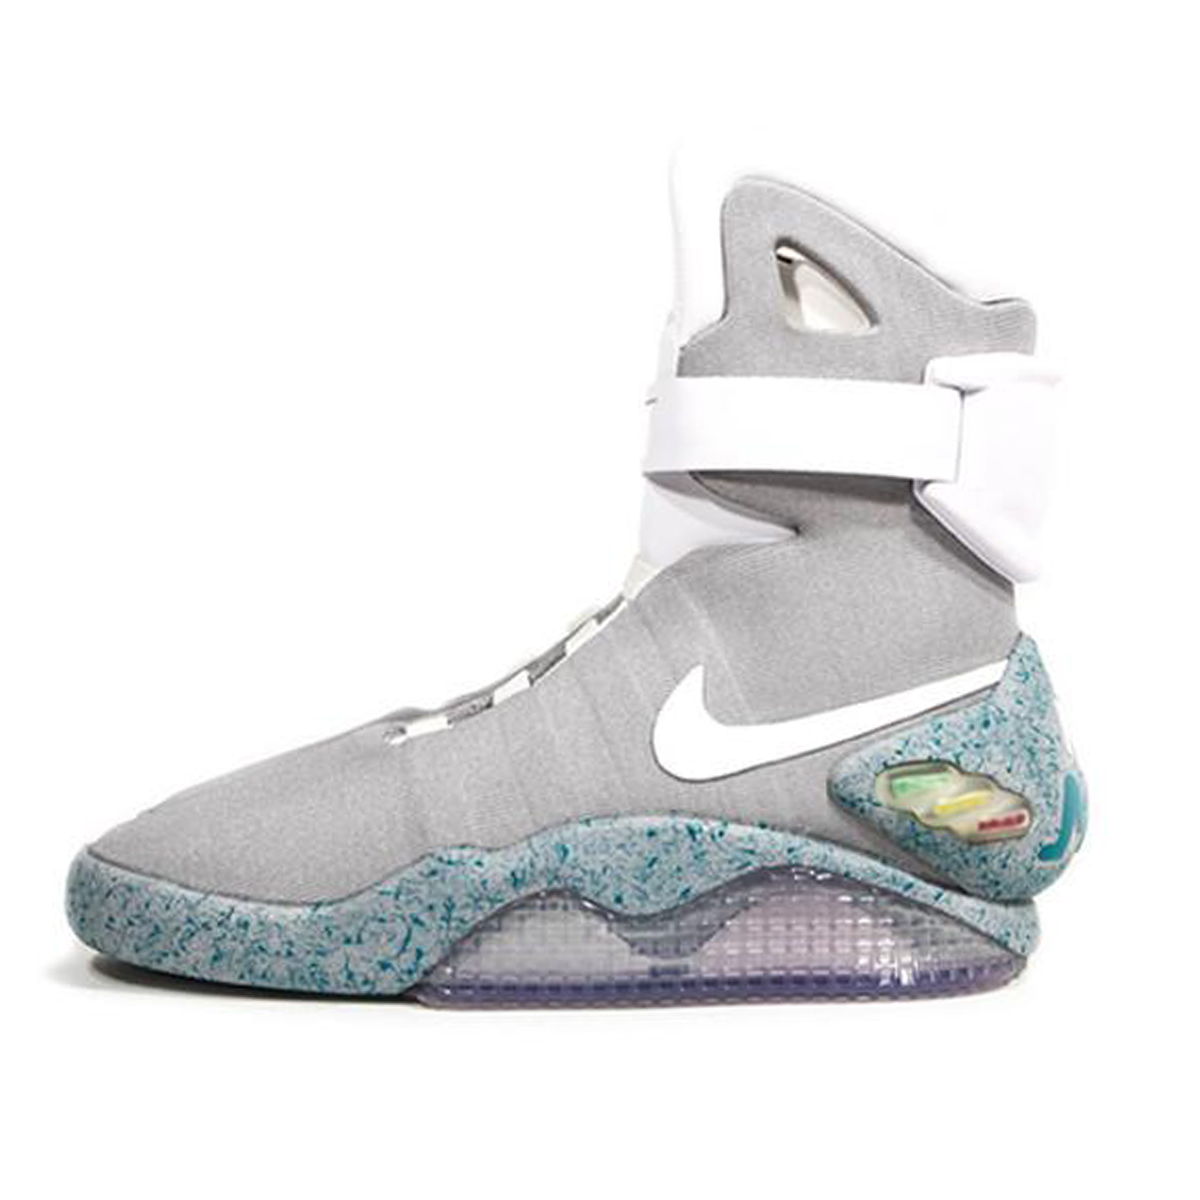 Air MAG Back To The Future (2011) | 417744-001 - KLEKT